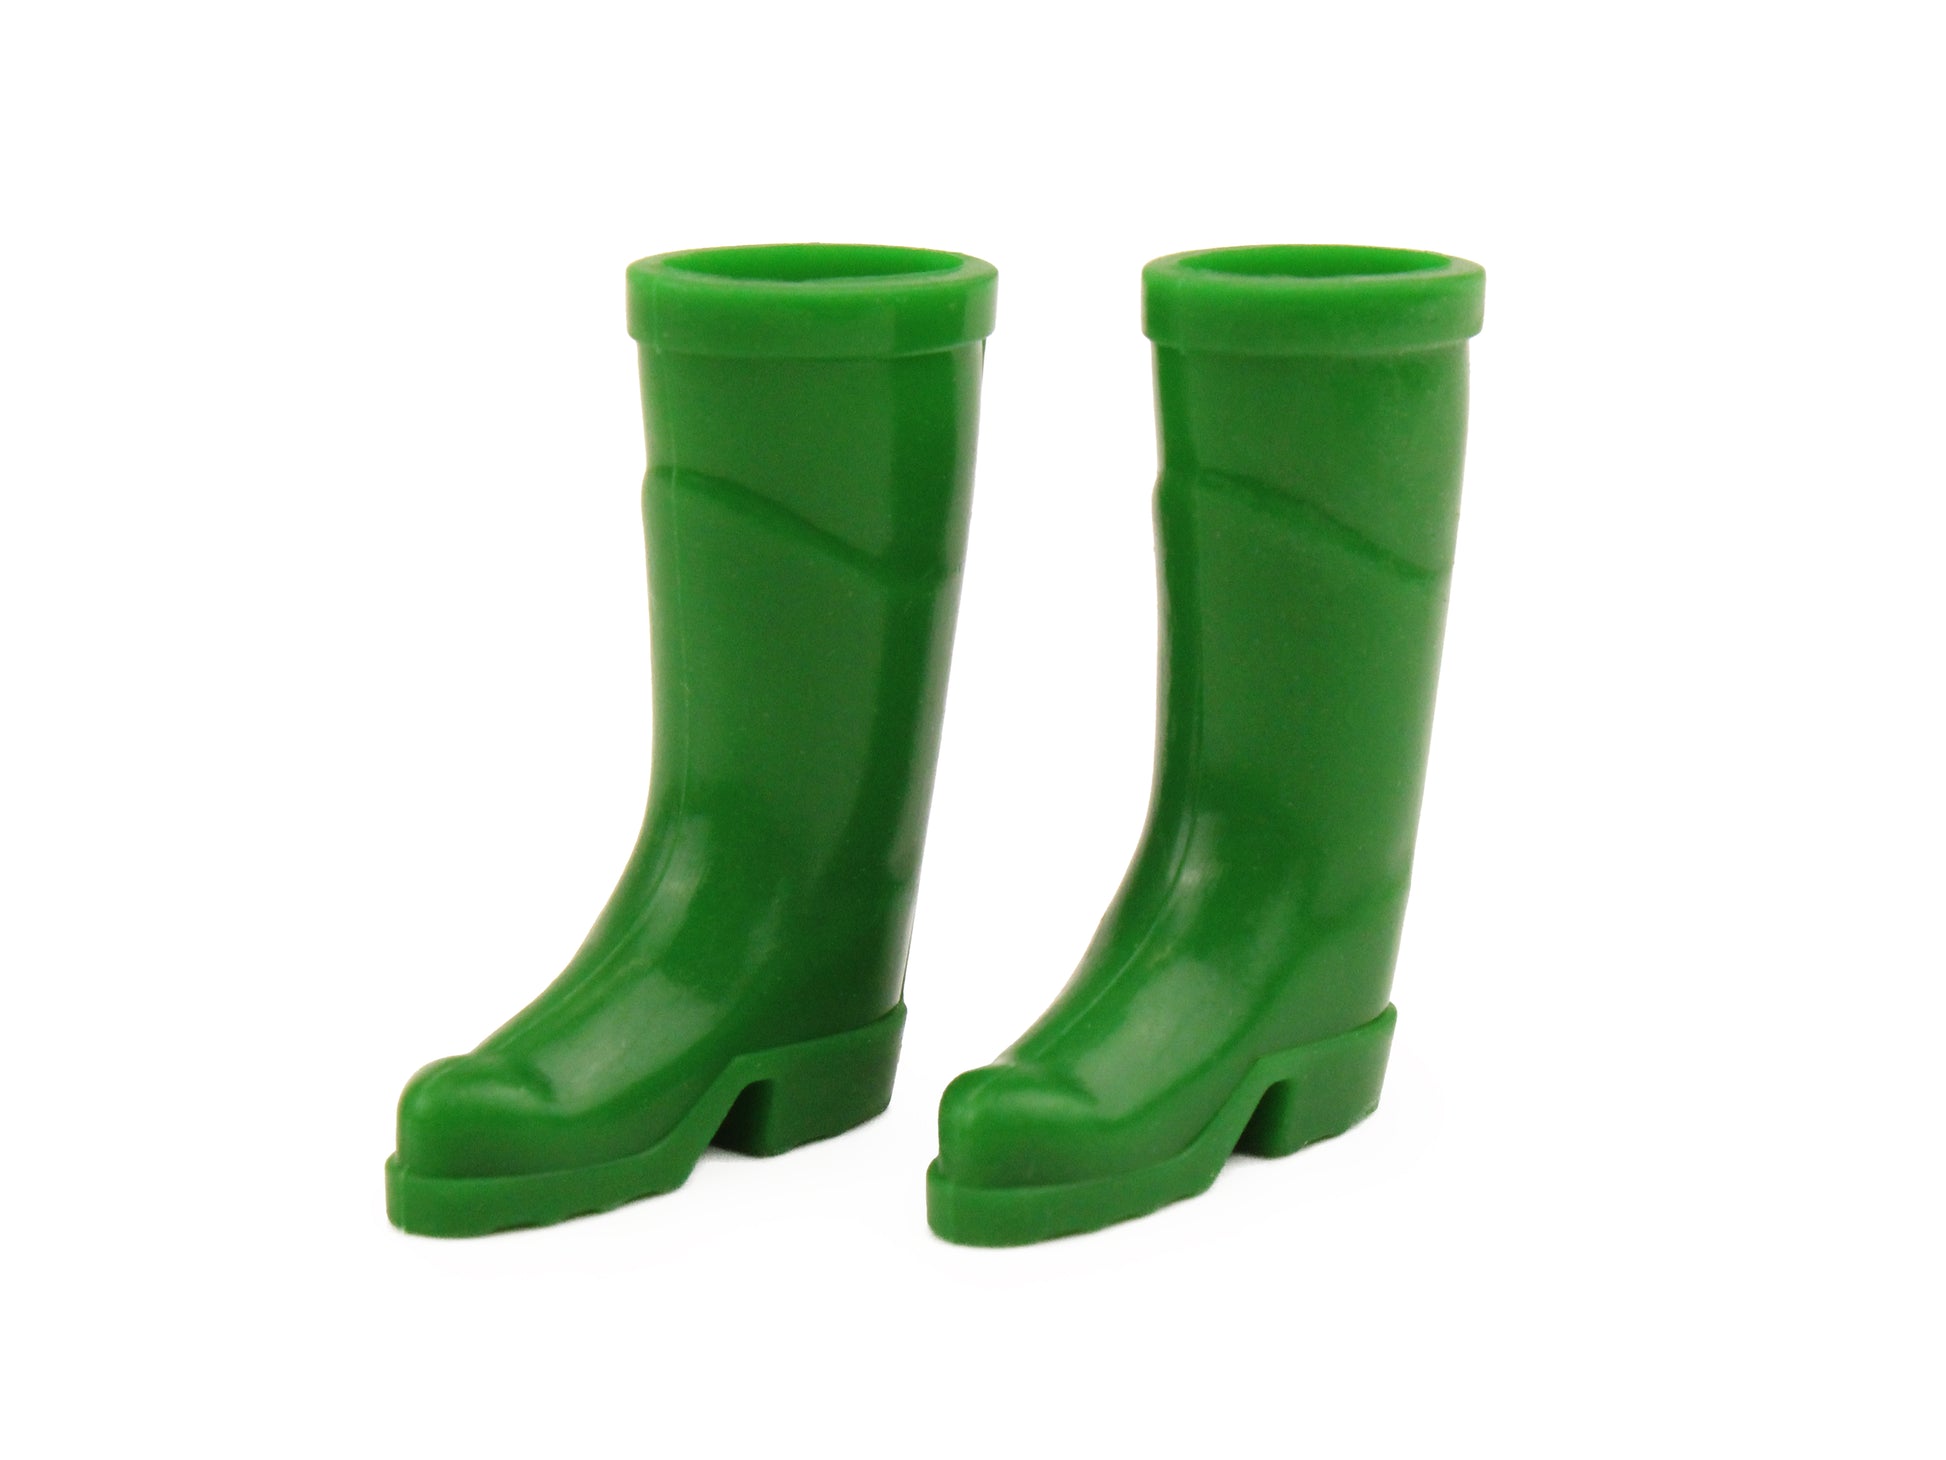 Wellington Boots - Needle Felting Character Accessories - The Makerss